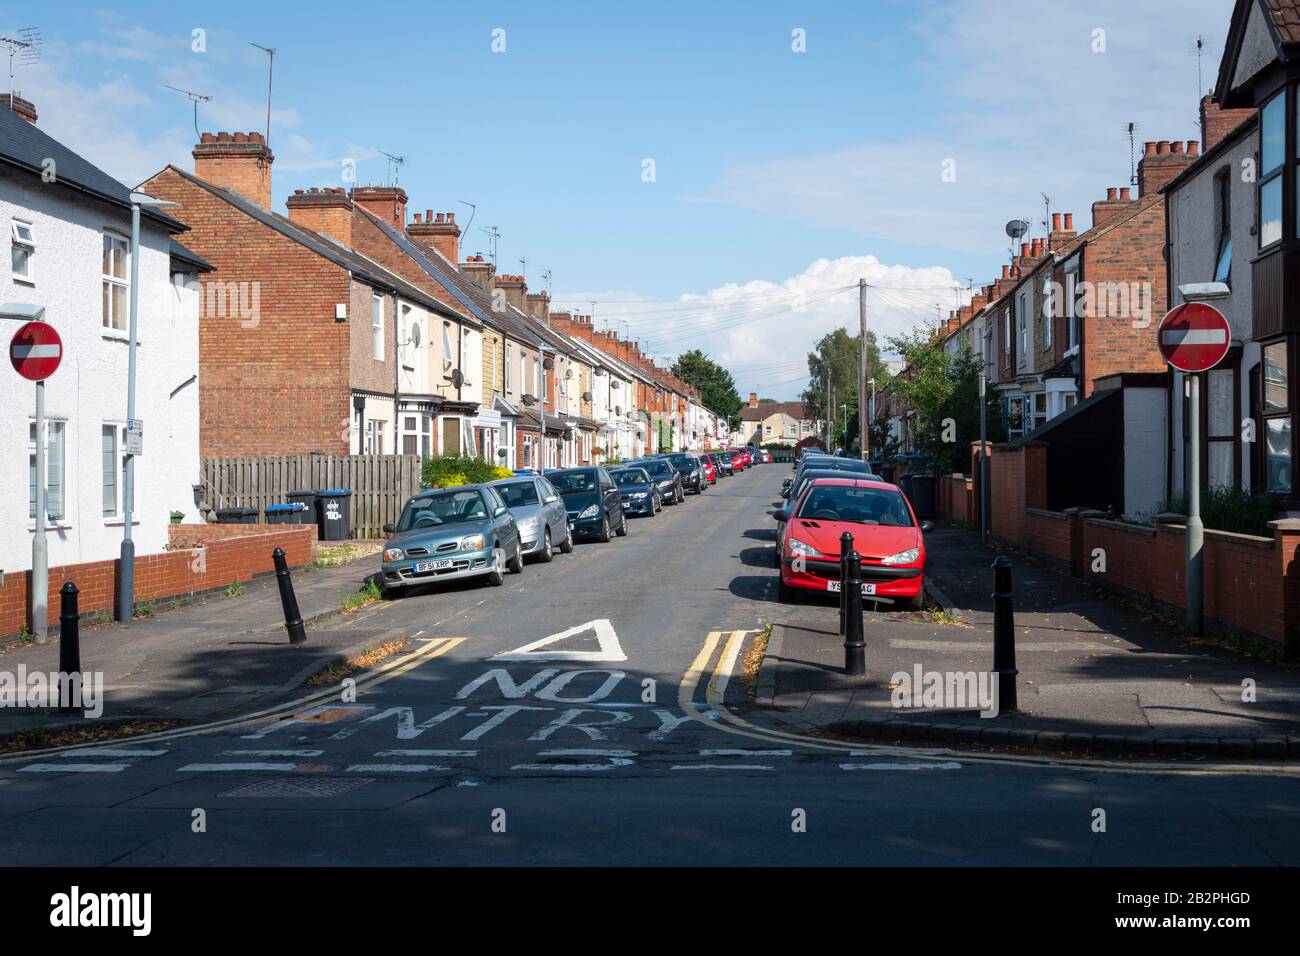 Narrow street with terraced houses, Rugby, Warwickshire, England Stock Photo